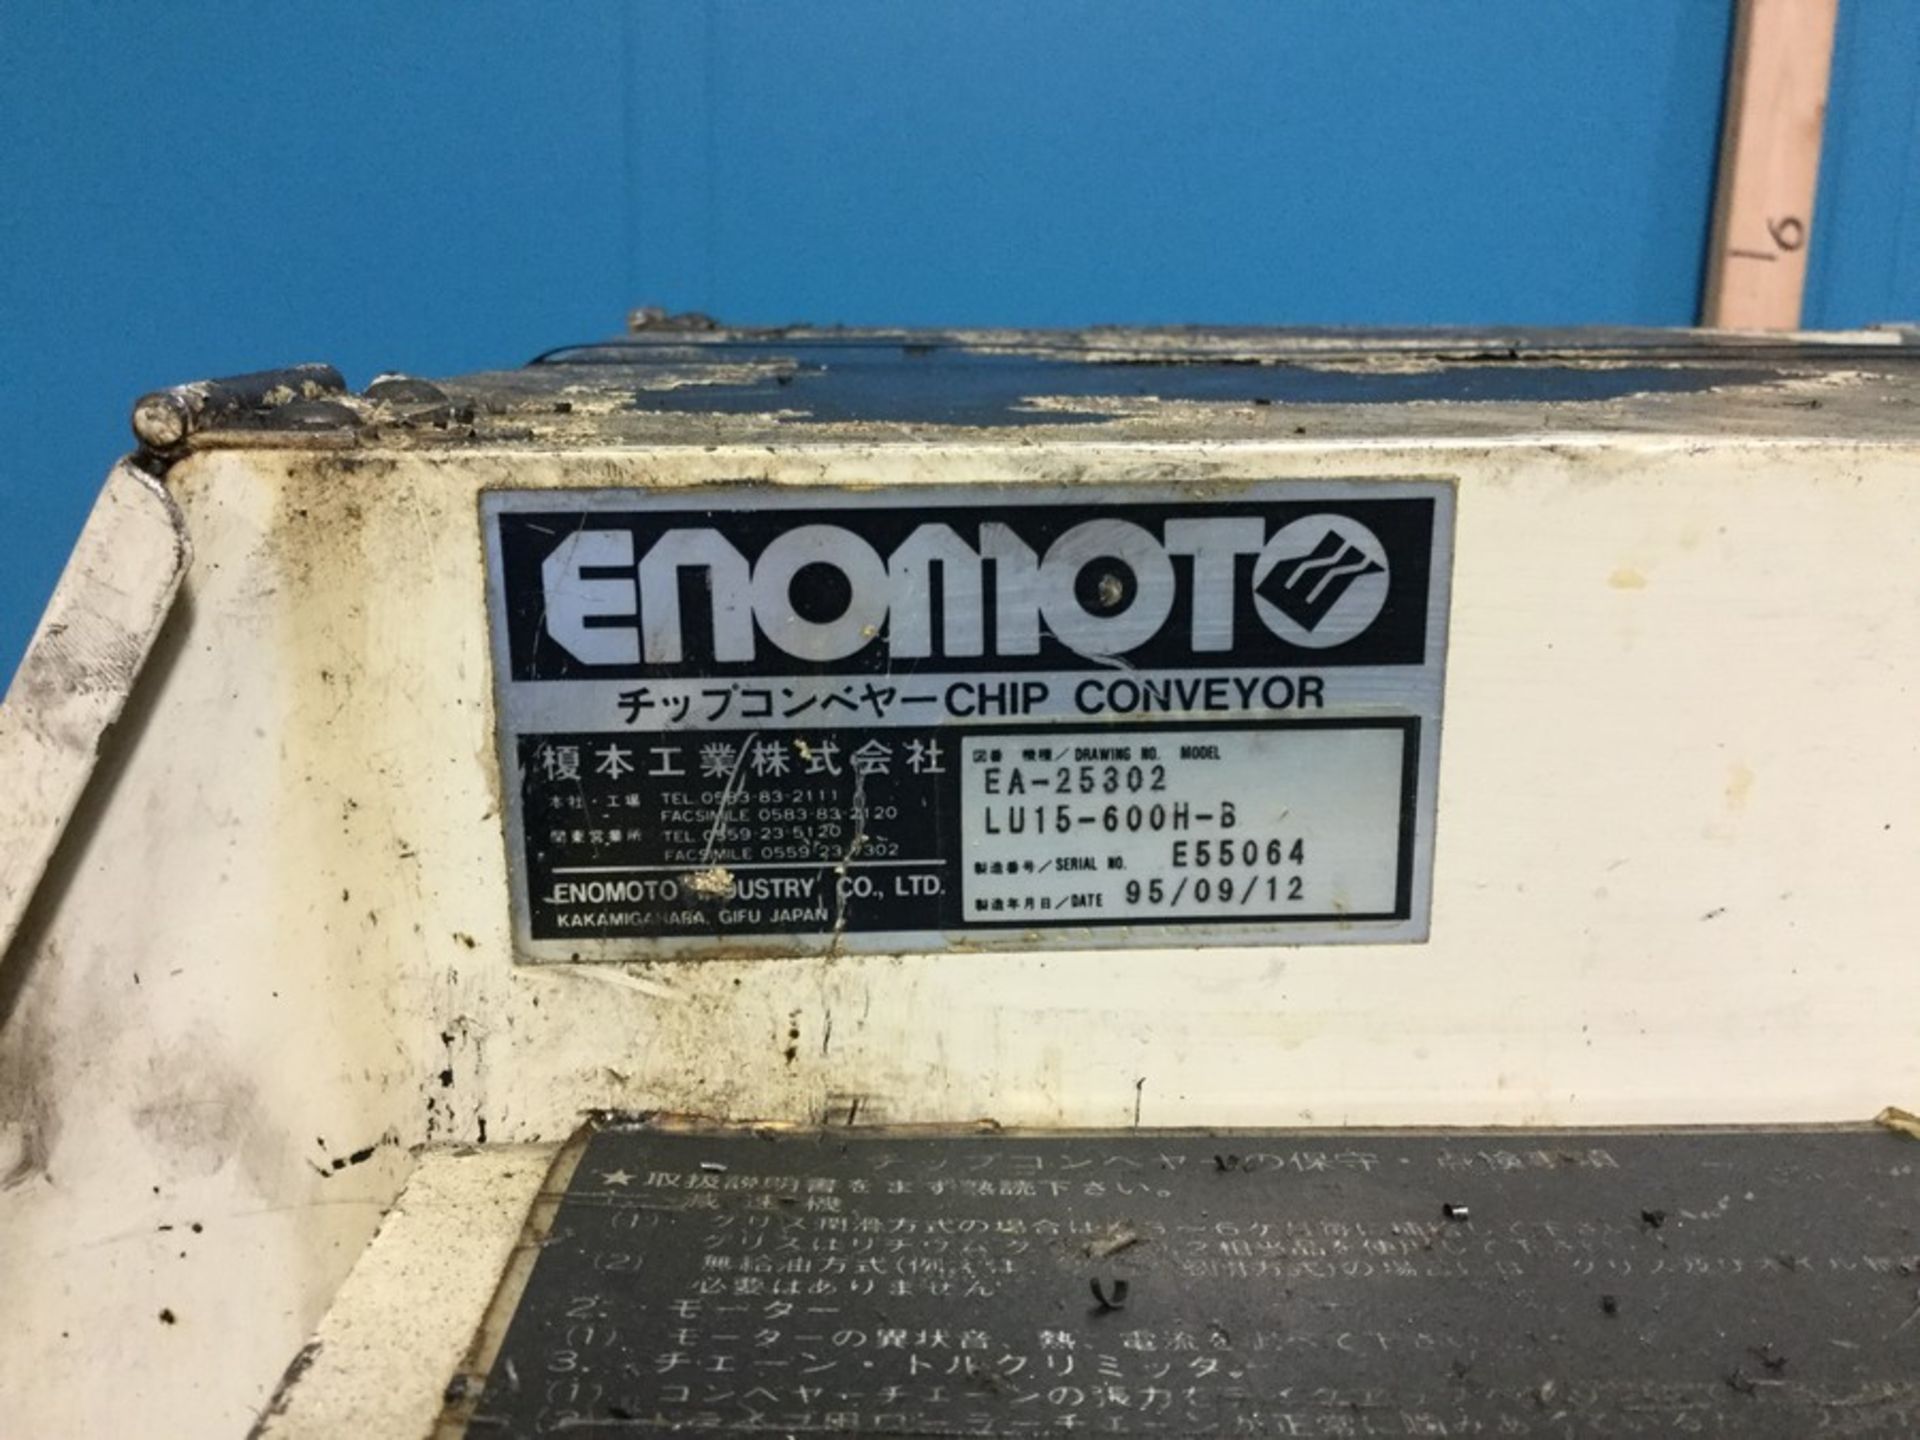 Enomoto Industry Chip Conveyor EA-25302 LU15-600H-B S/N E55064 12" in. Wide Chip Track, no tag on - Image 2 of 7